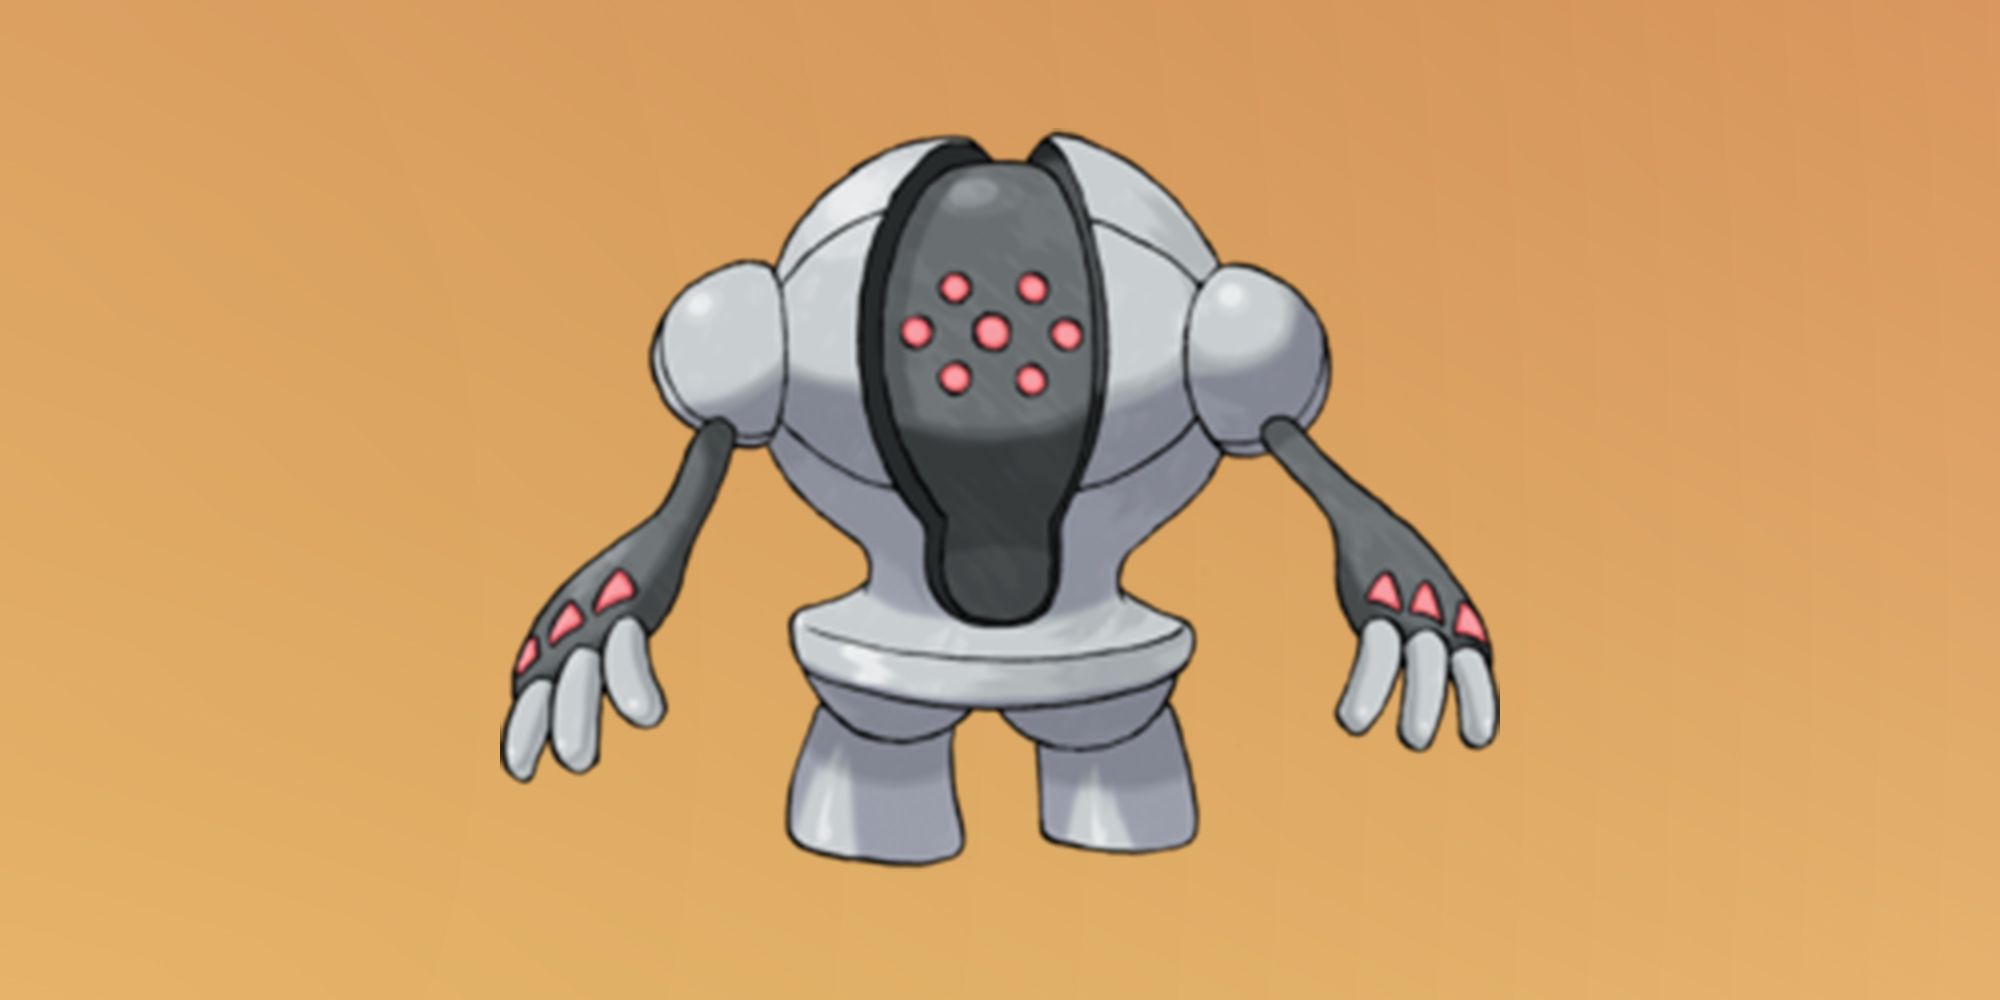 Pokemon Go Registeel Guide: Best Counters, Weaknesses and Moves - CNET